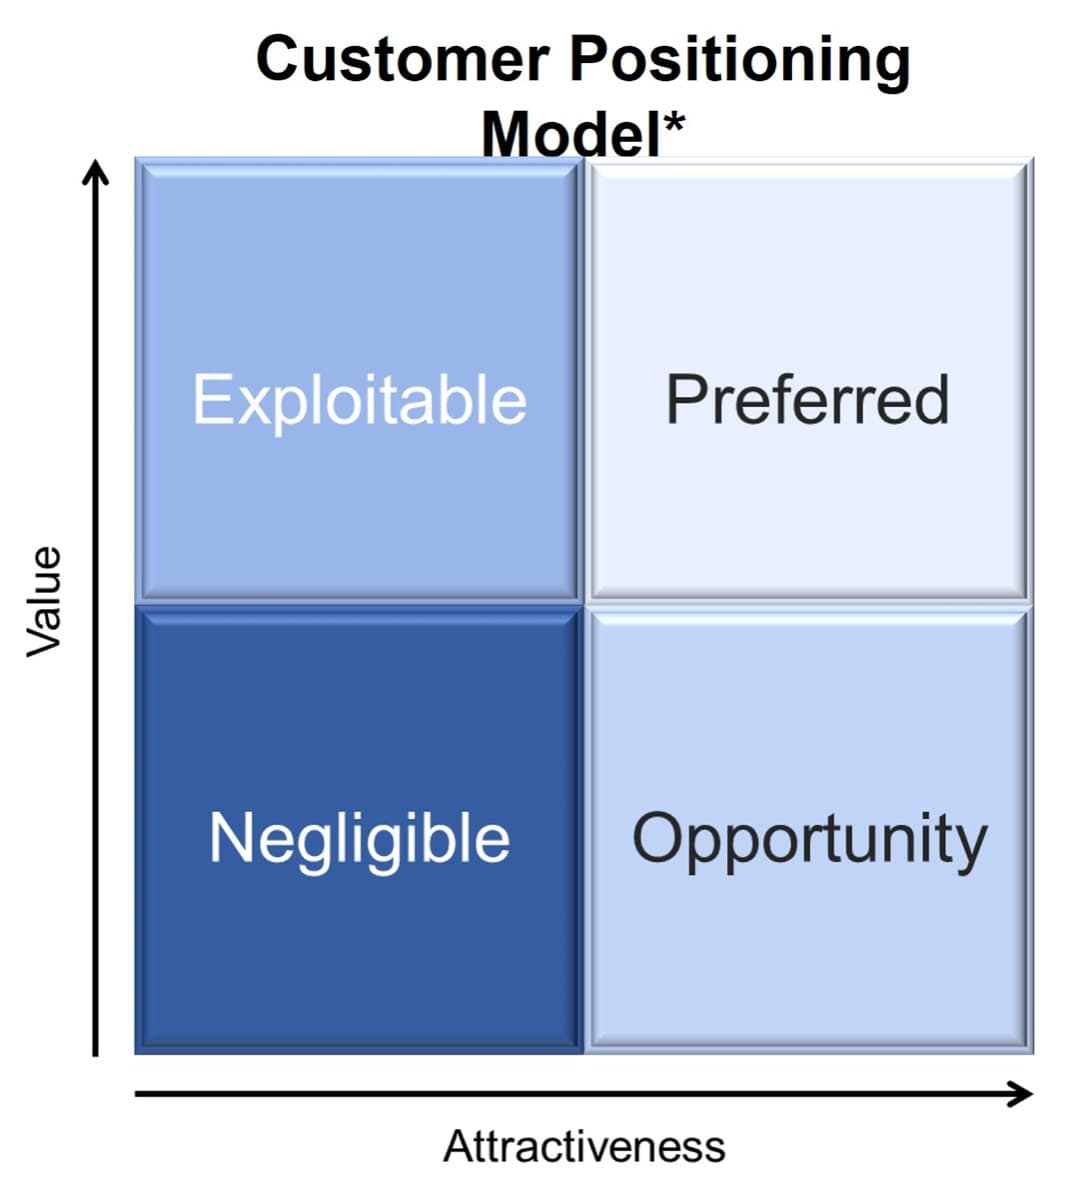 The image contains a screenshot of the customer positioning model.